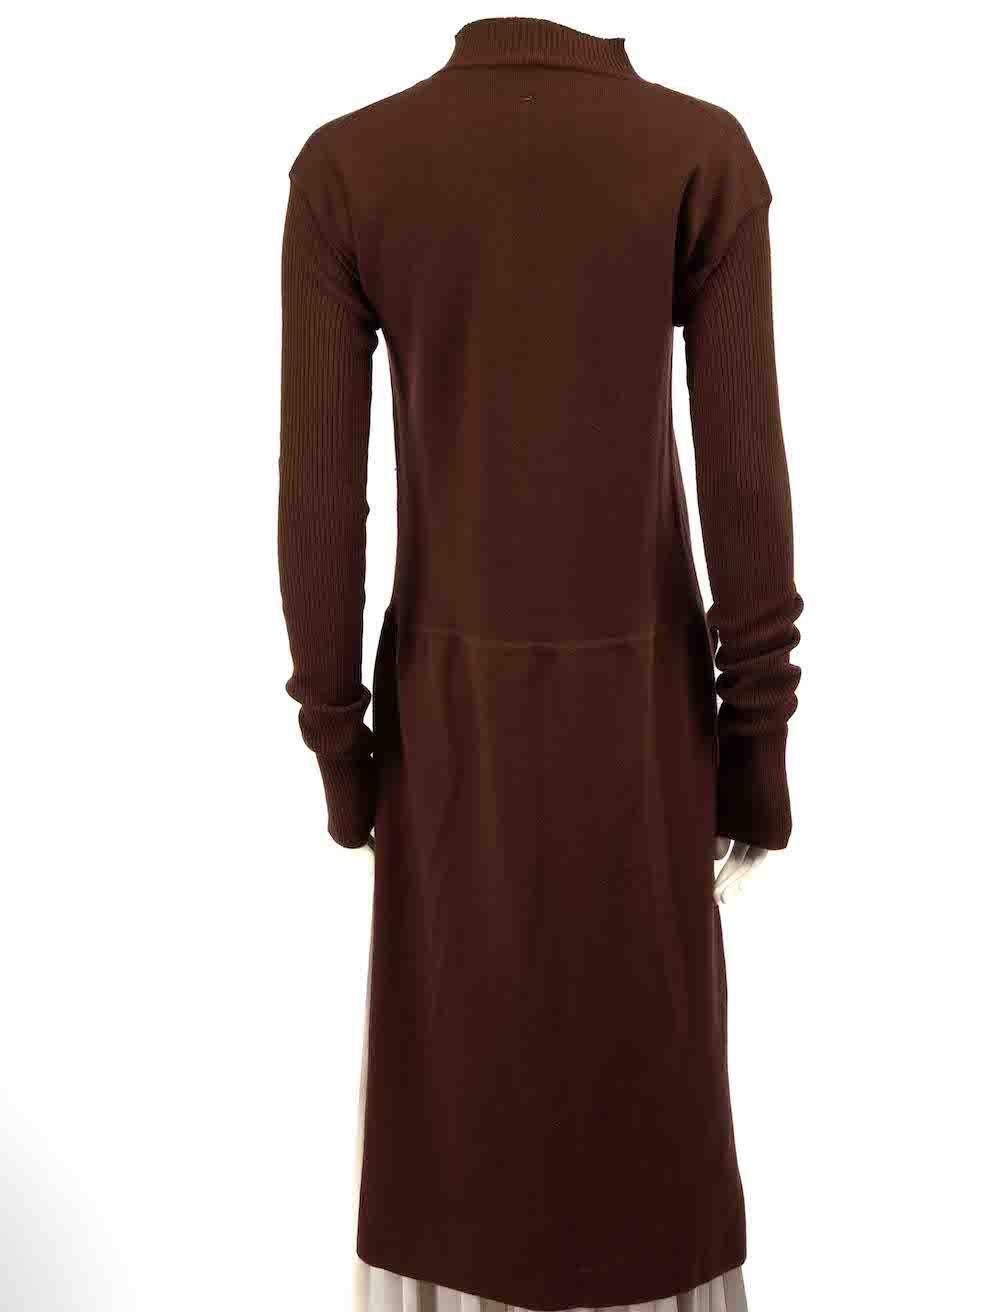 Rick Owens F/W 2014 Brown Midi Knitted Top Size M In Good Condition For Sale In London, GB